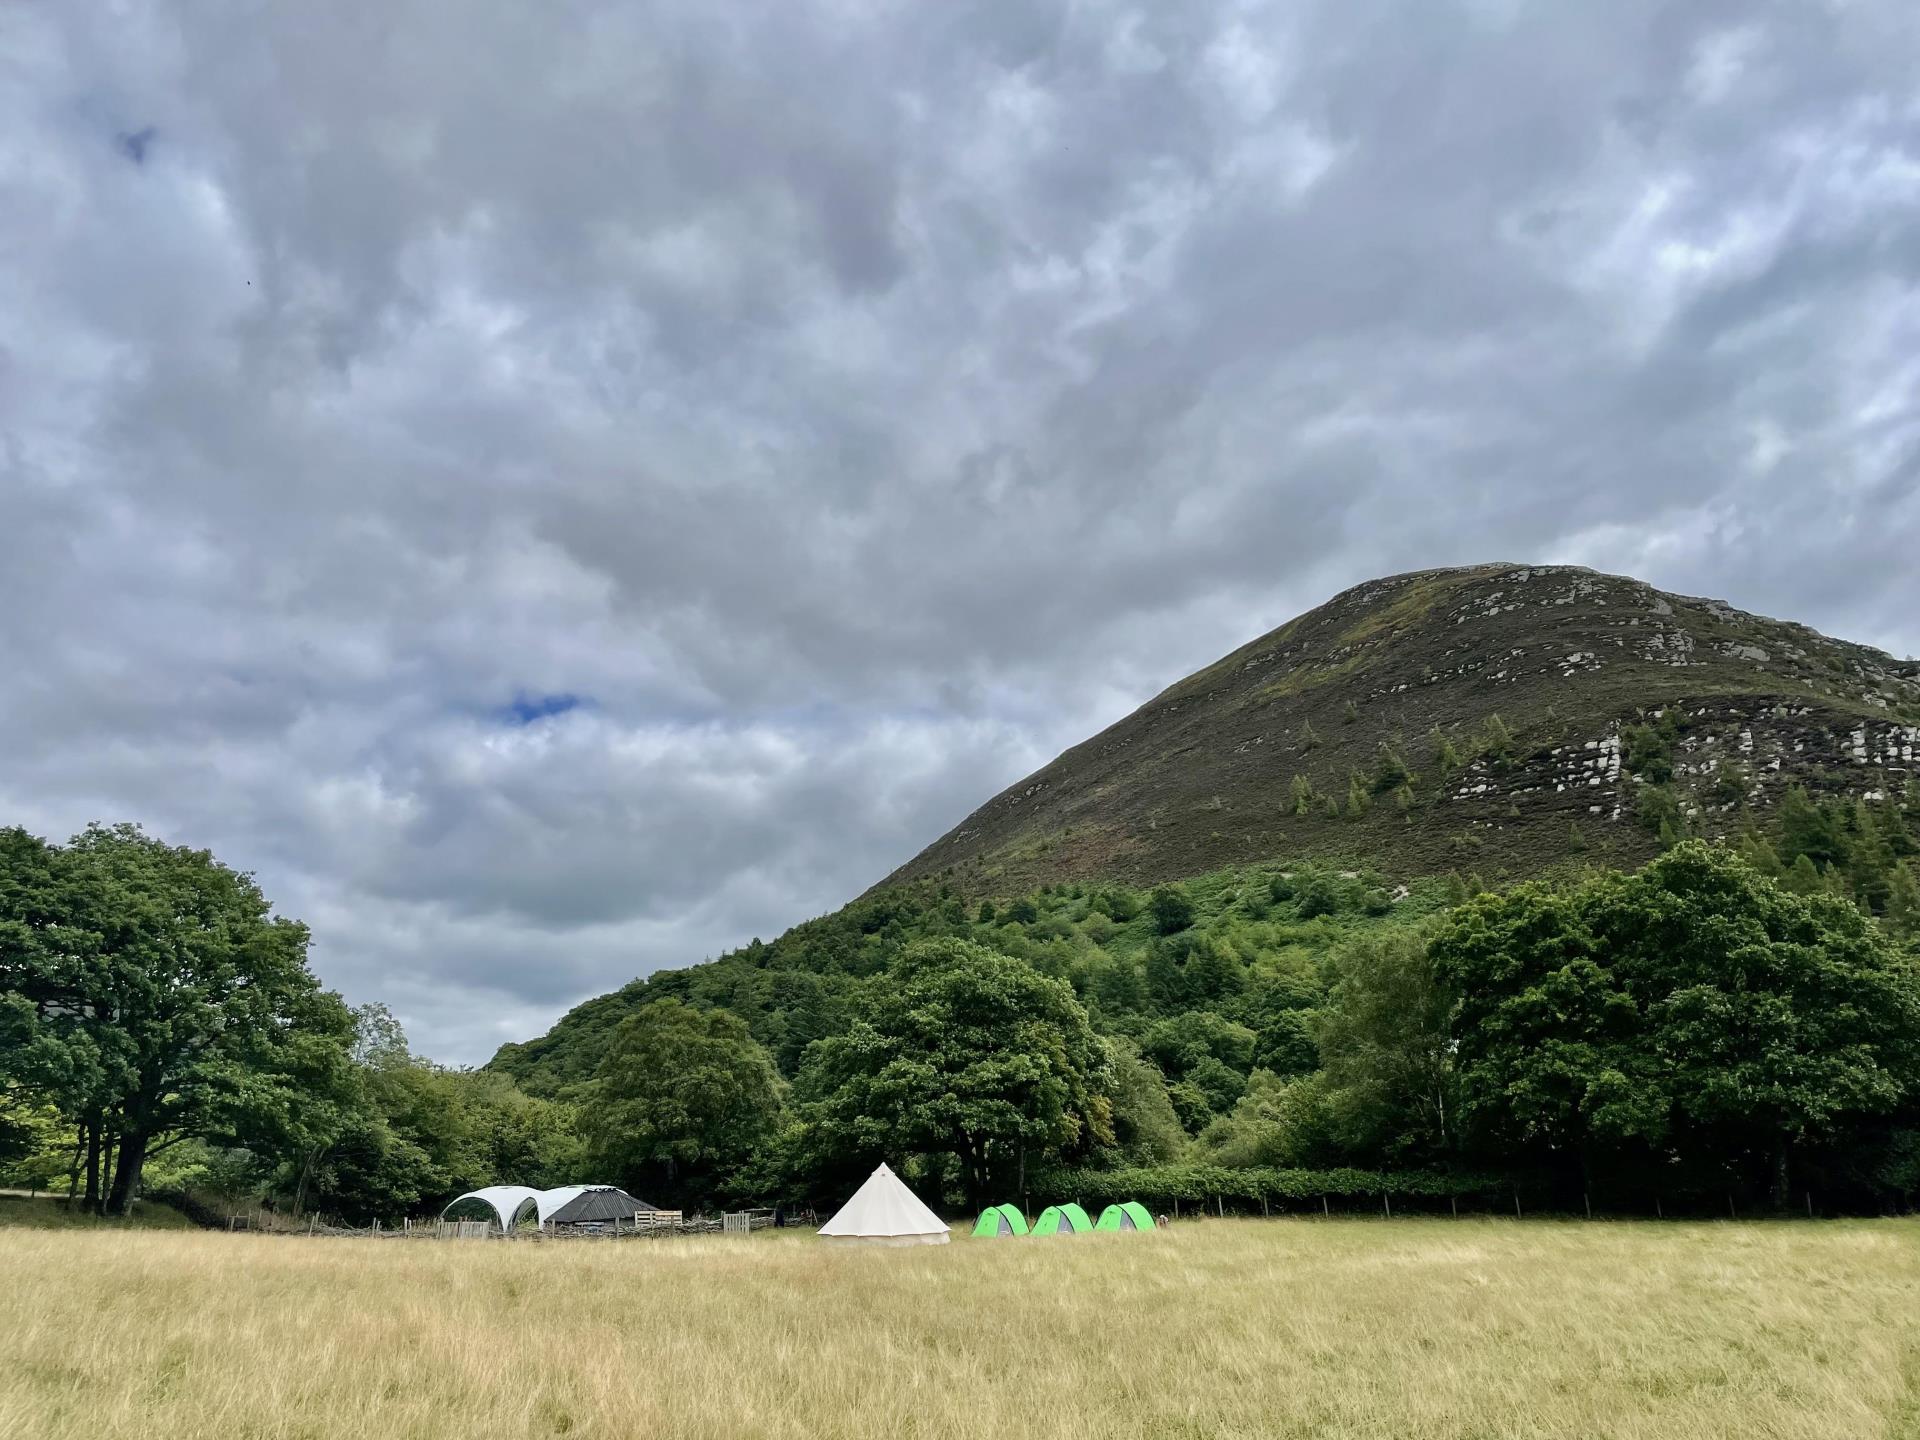 Our bushcraft site in mid-Wales